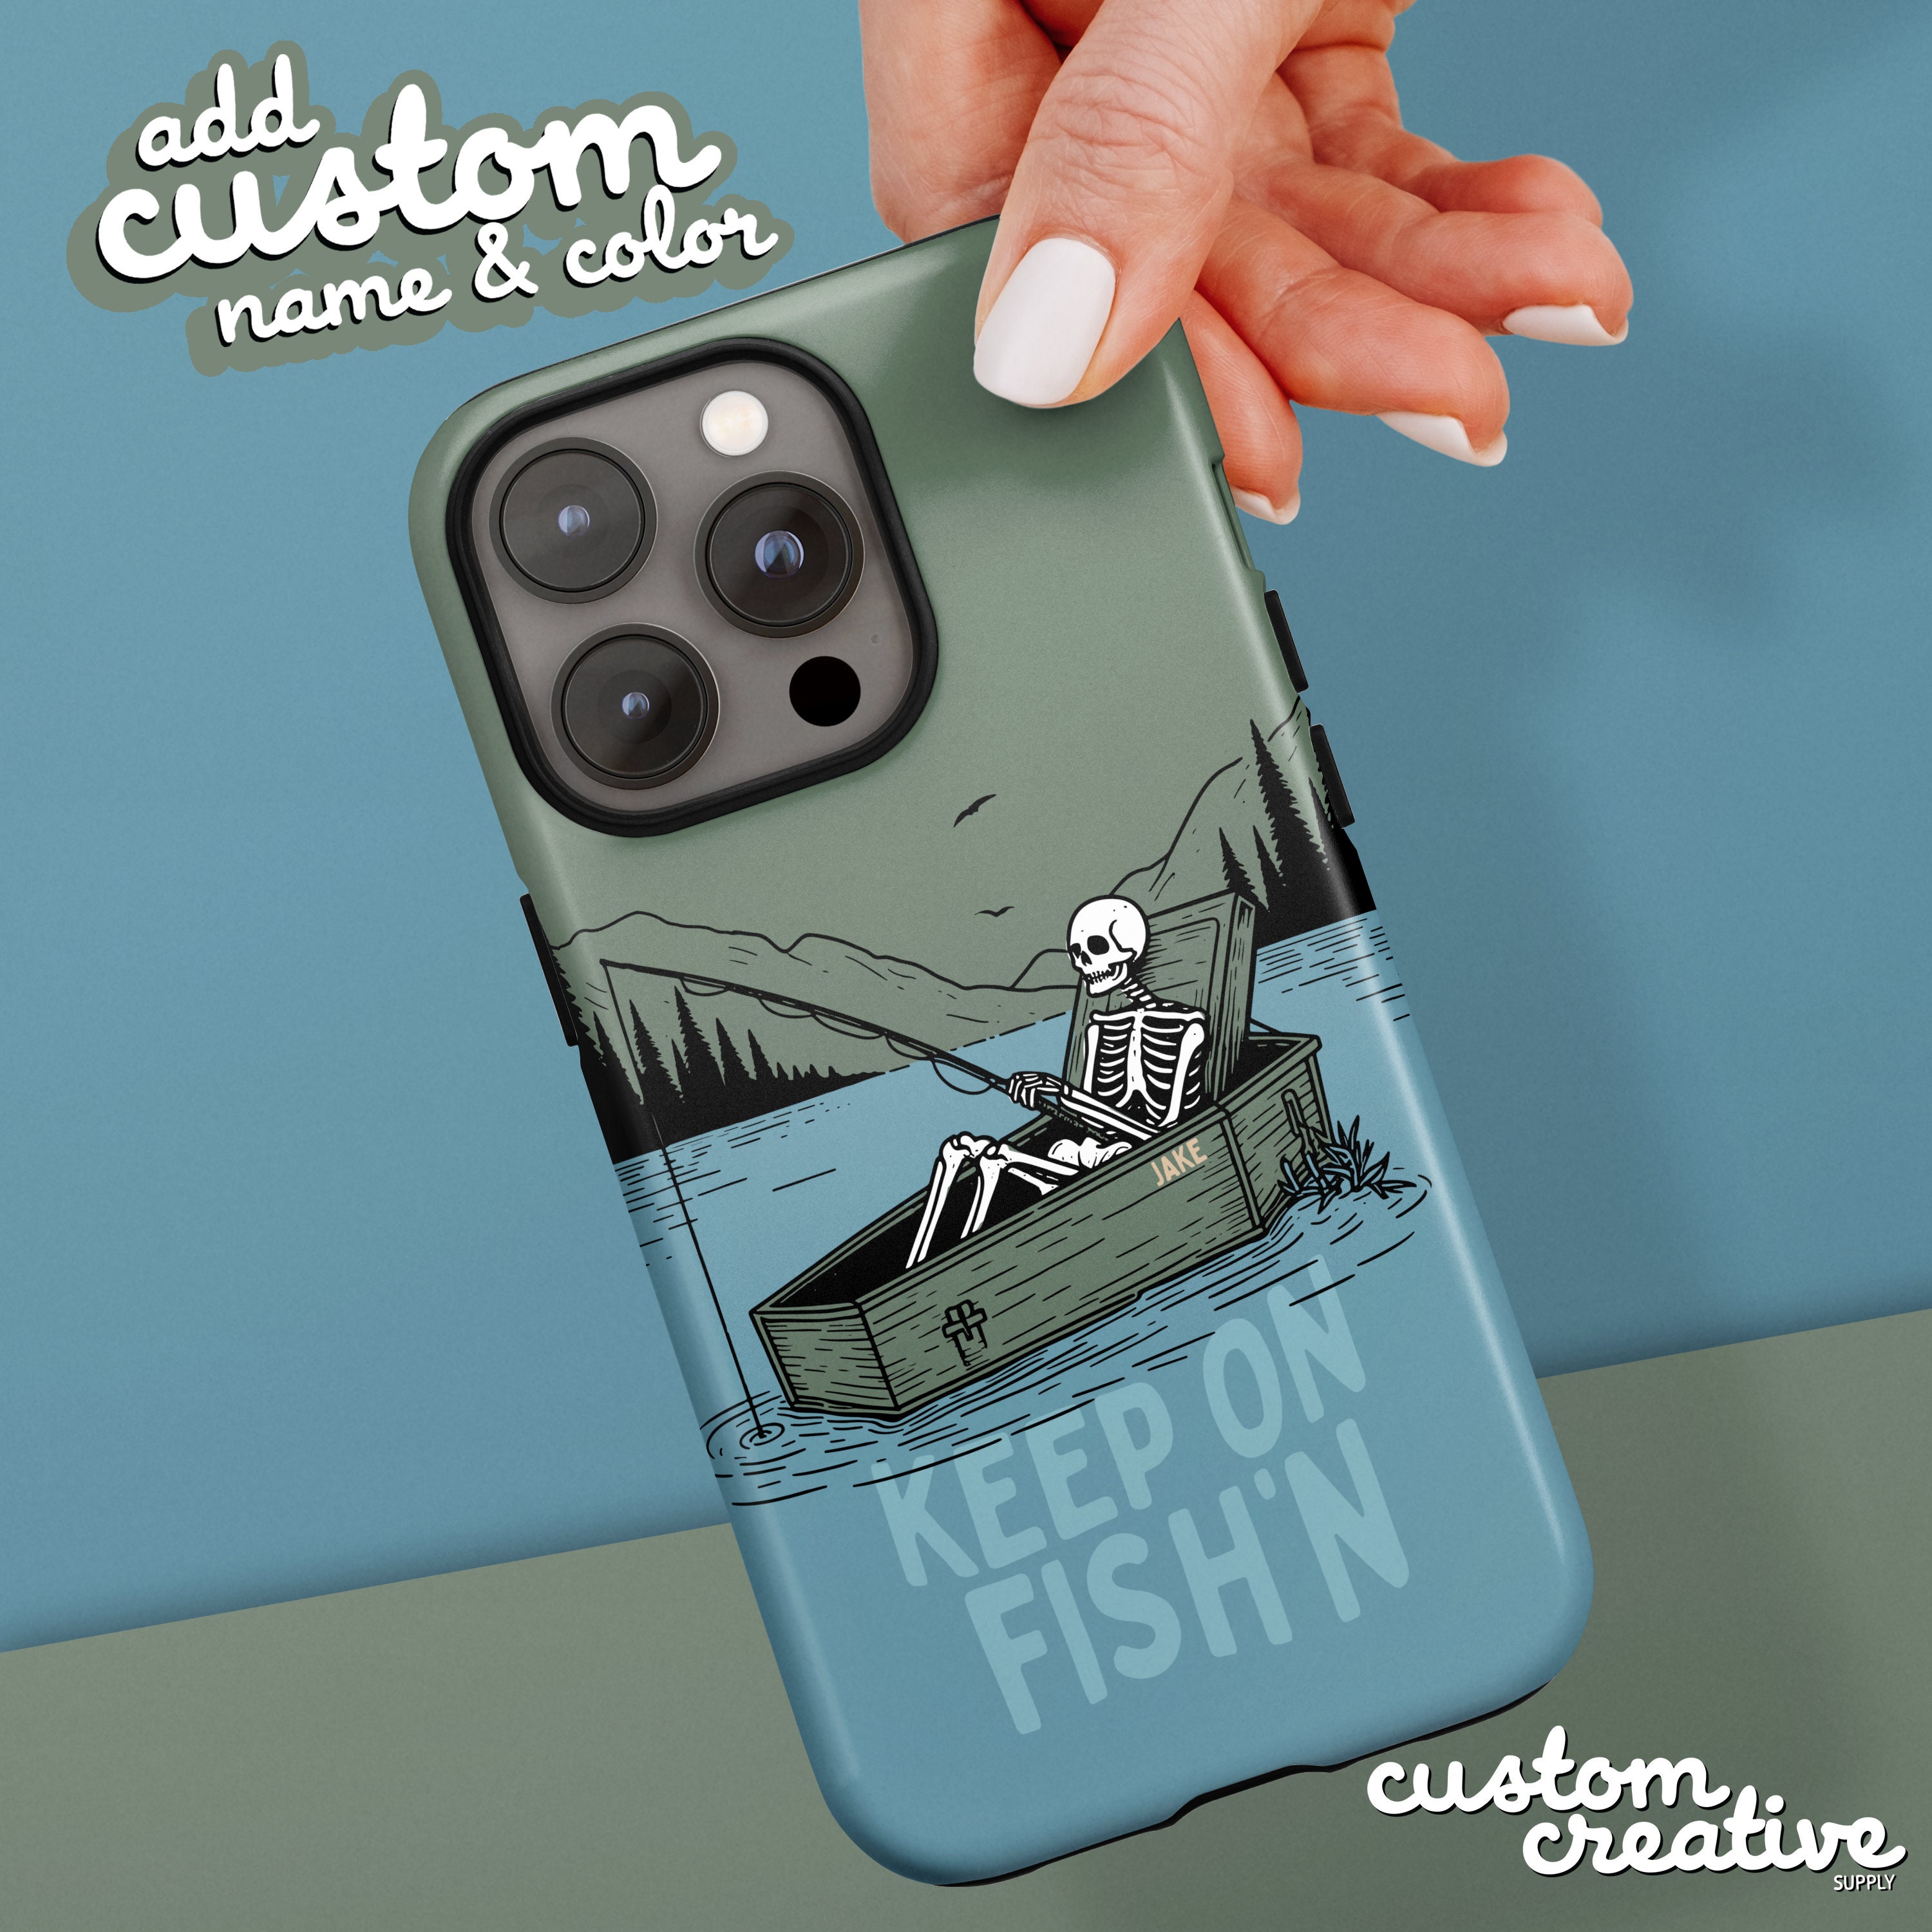  iPhone 12/12 Pro Fisherman Men Humor Fishing Bass Fish Funny  Case : Cell Phones & Accessories